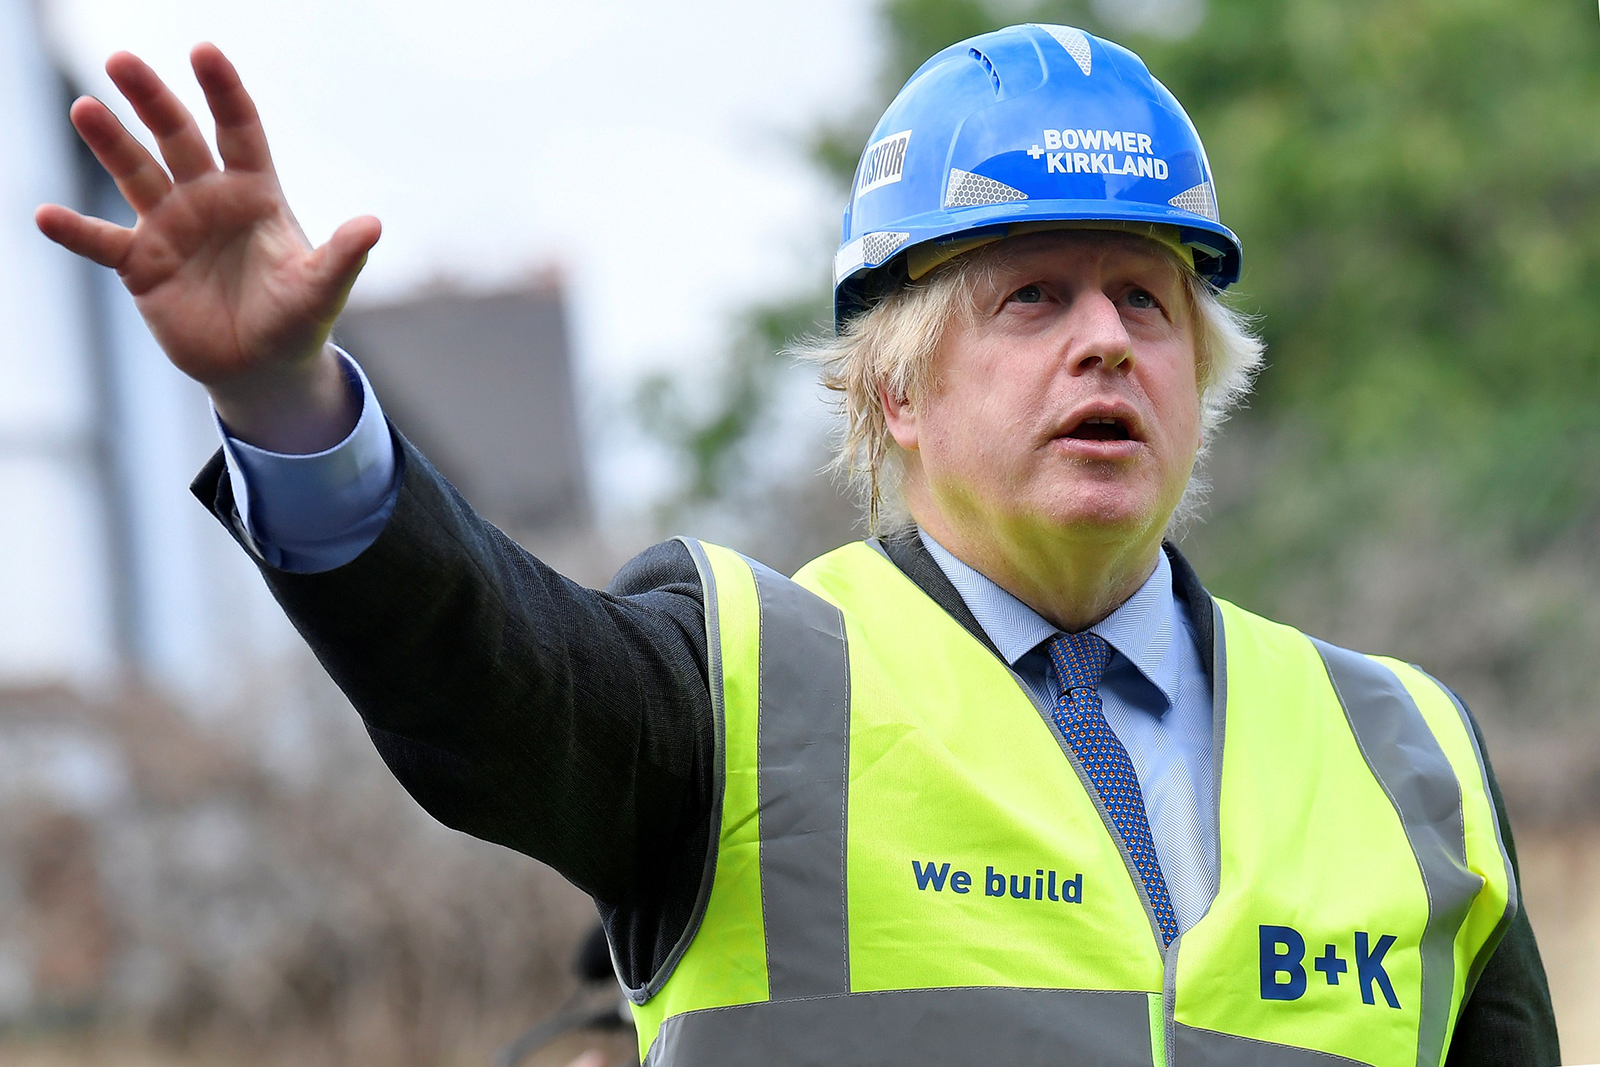 Britain's Prime Minister Boris Johnson gestures as he visits the construction site of Ealing Fields High School on June 29 in London.